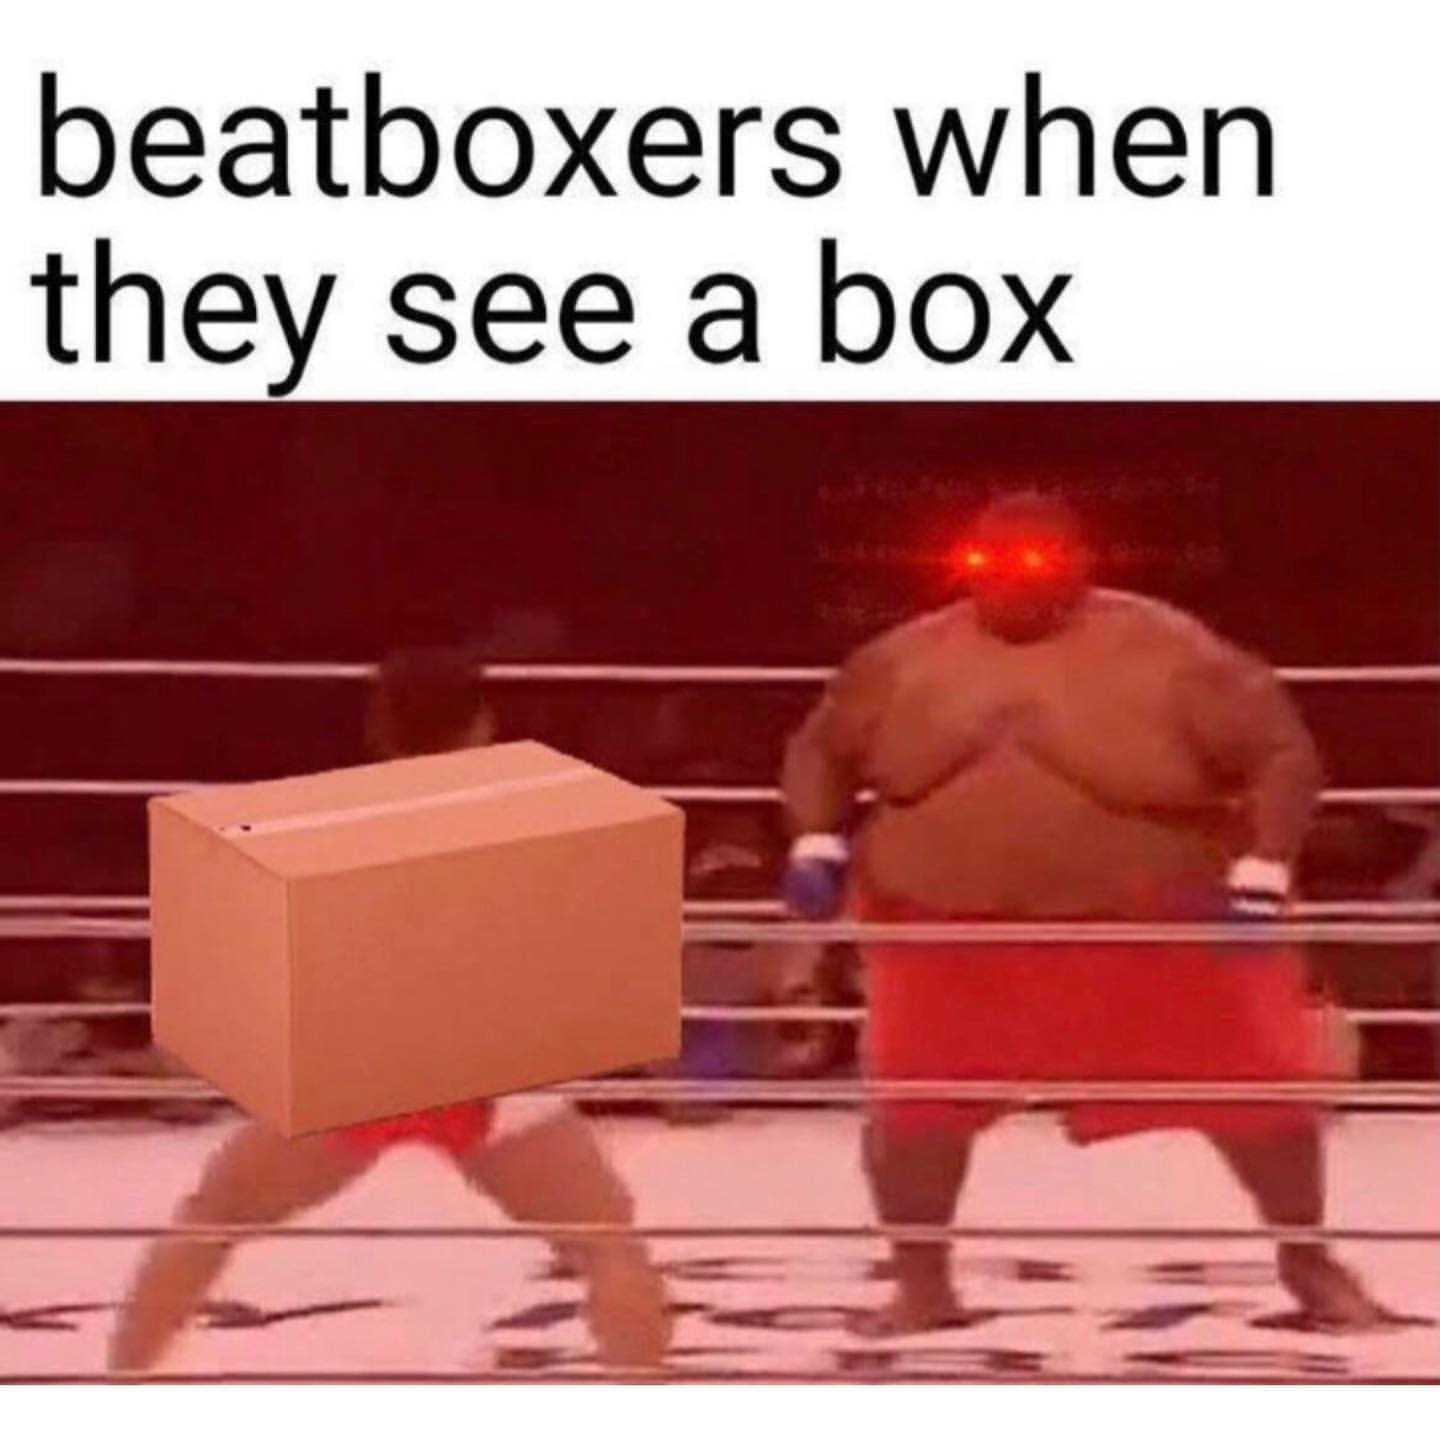 Beatboxers when they see a box.